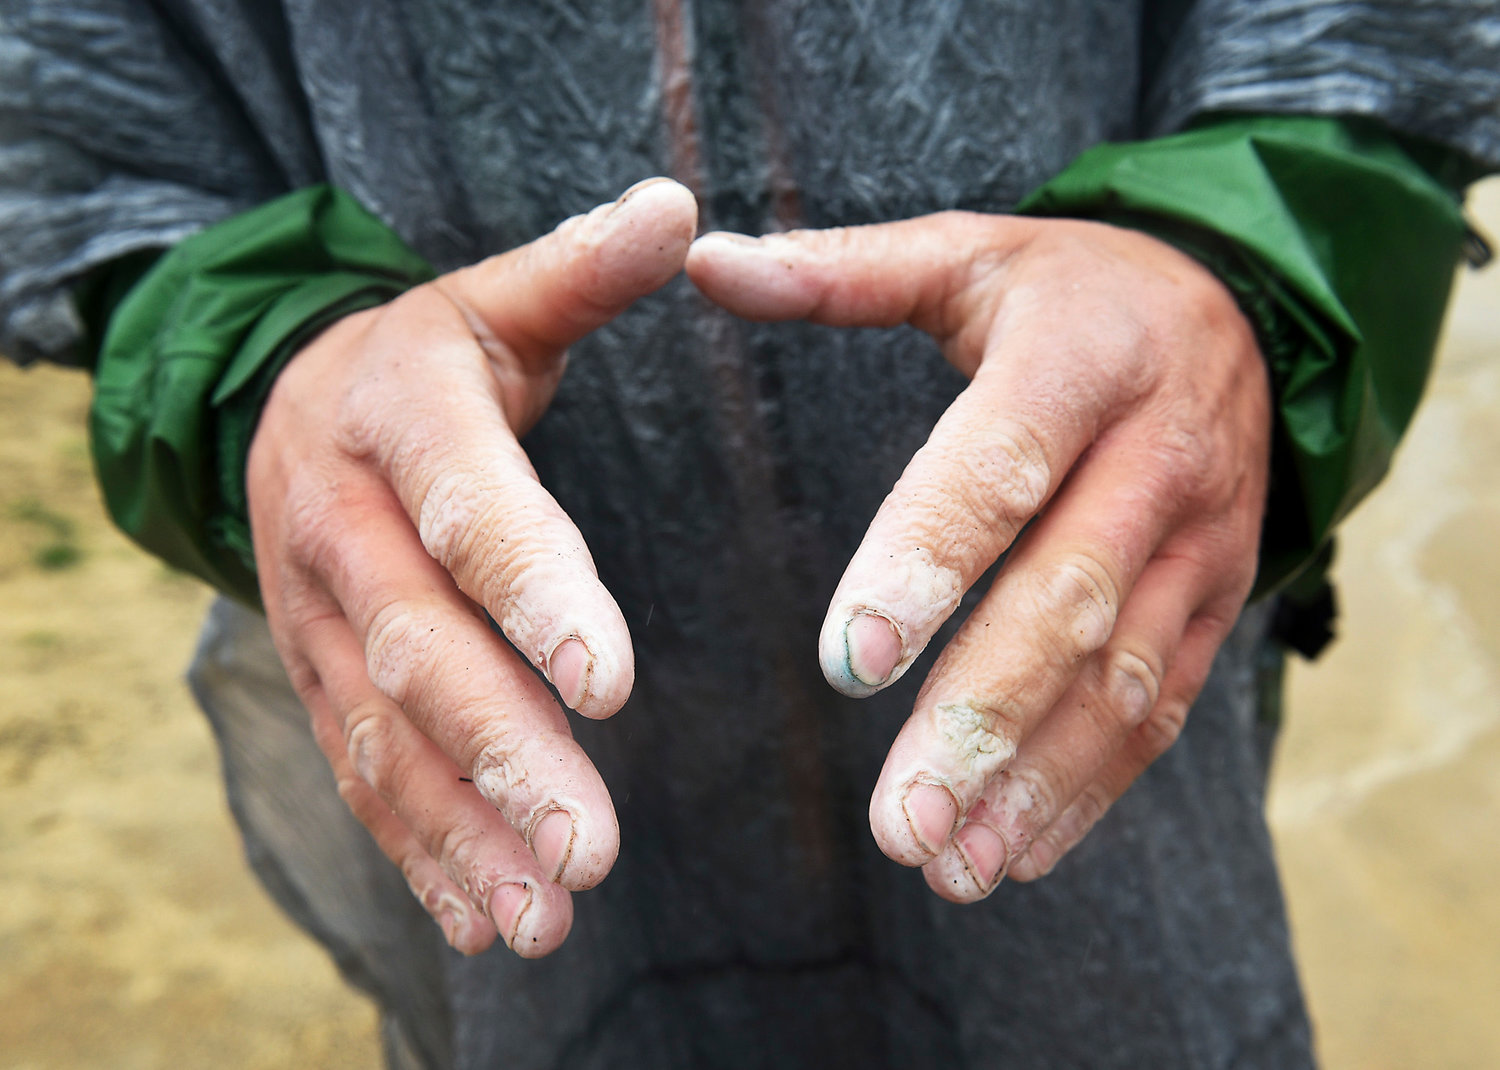 In this March 1, 2015 photo, hiker Justin Lichter shows his hands that were affected by wet weather after arriving at the southern terminus of their historic journey on the Pacific Crest Trail at the Mexican border near Campo, Calif. By completing what's thought to be the first wintertime through-hike of the iconic trail, Lichter and Forry broke a huge American hiking barrier and raised the bar for what's possible when it comes to adventure. (AP Photo/Reno Gazette-Journal, Jason Bean)